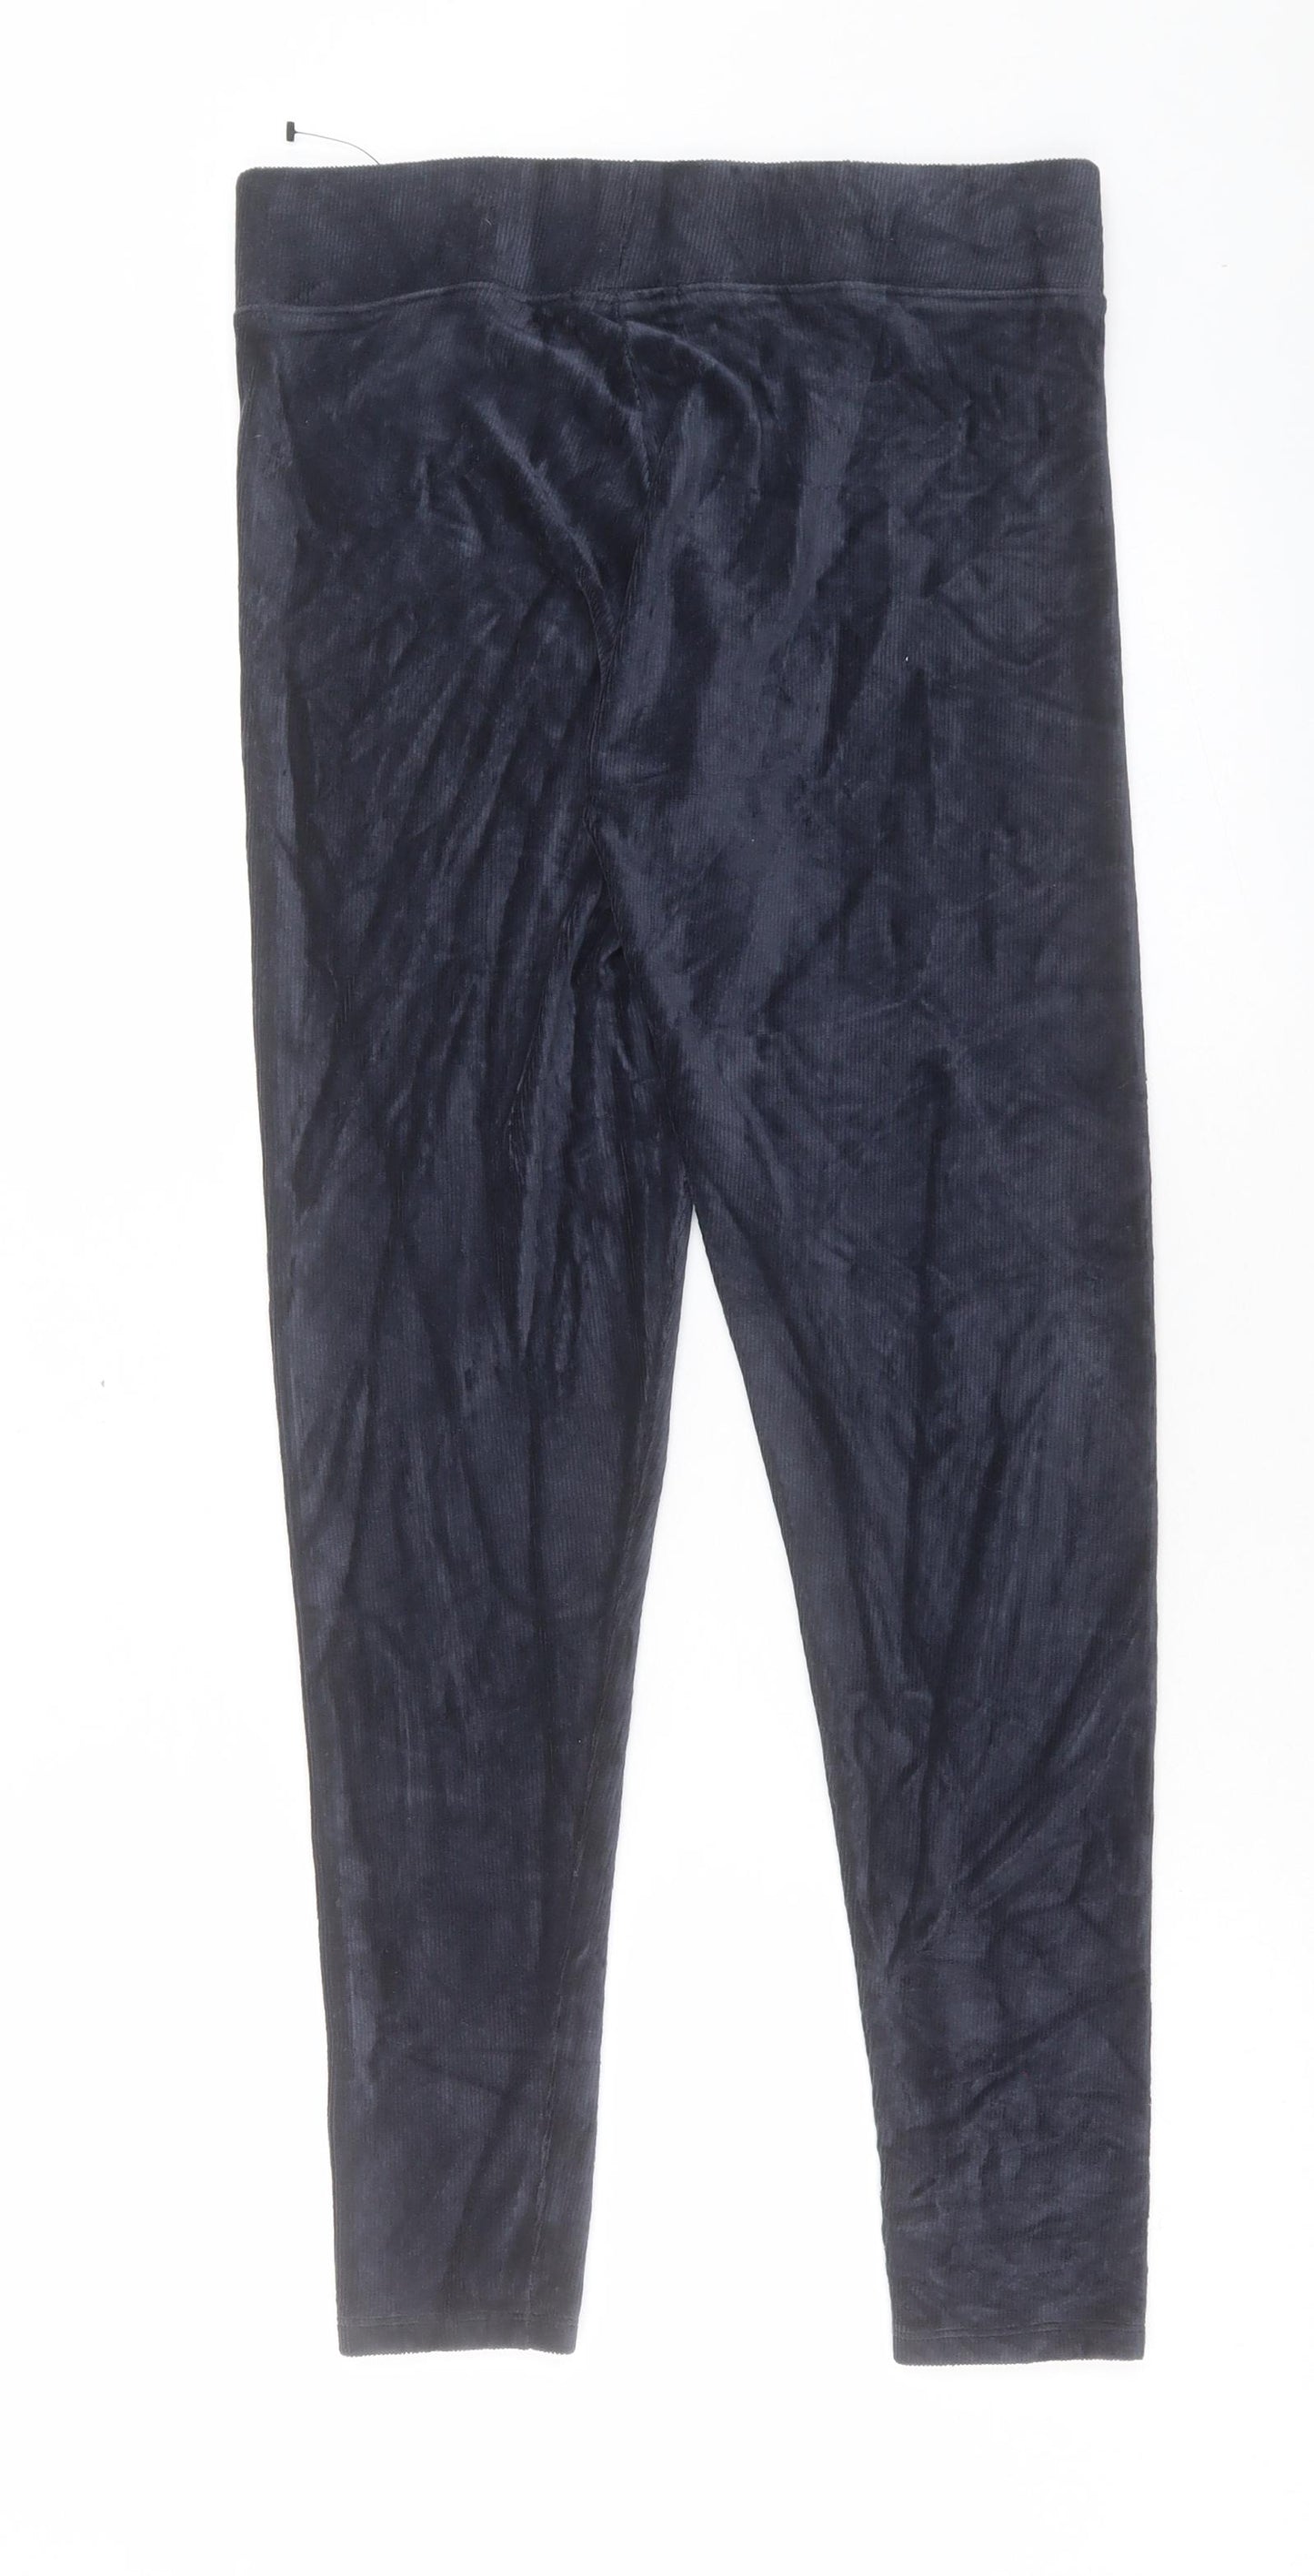 Marks and Spencer Womens Blue Cotton Jogger Leggings Size 10 L29 in